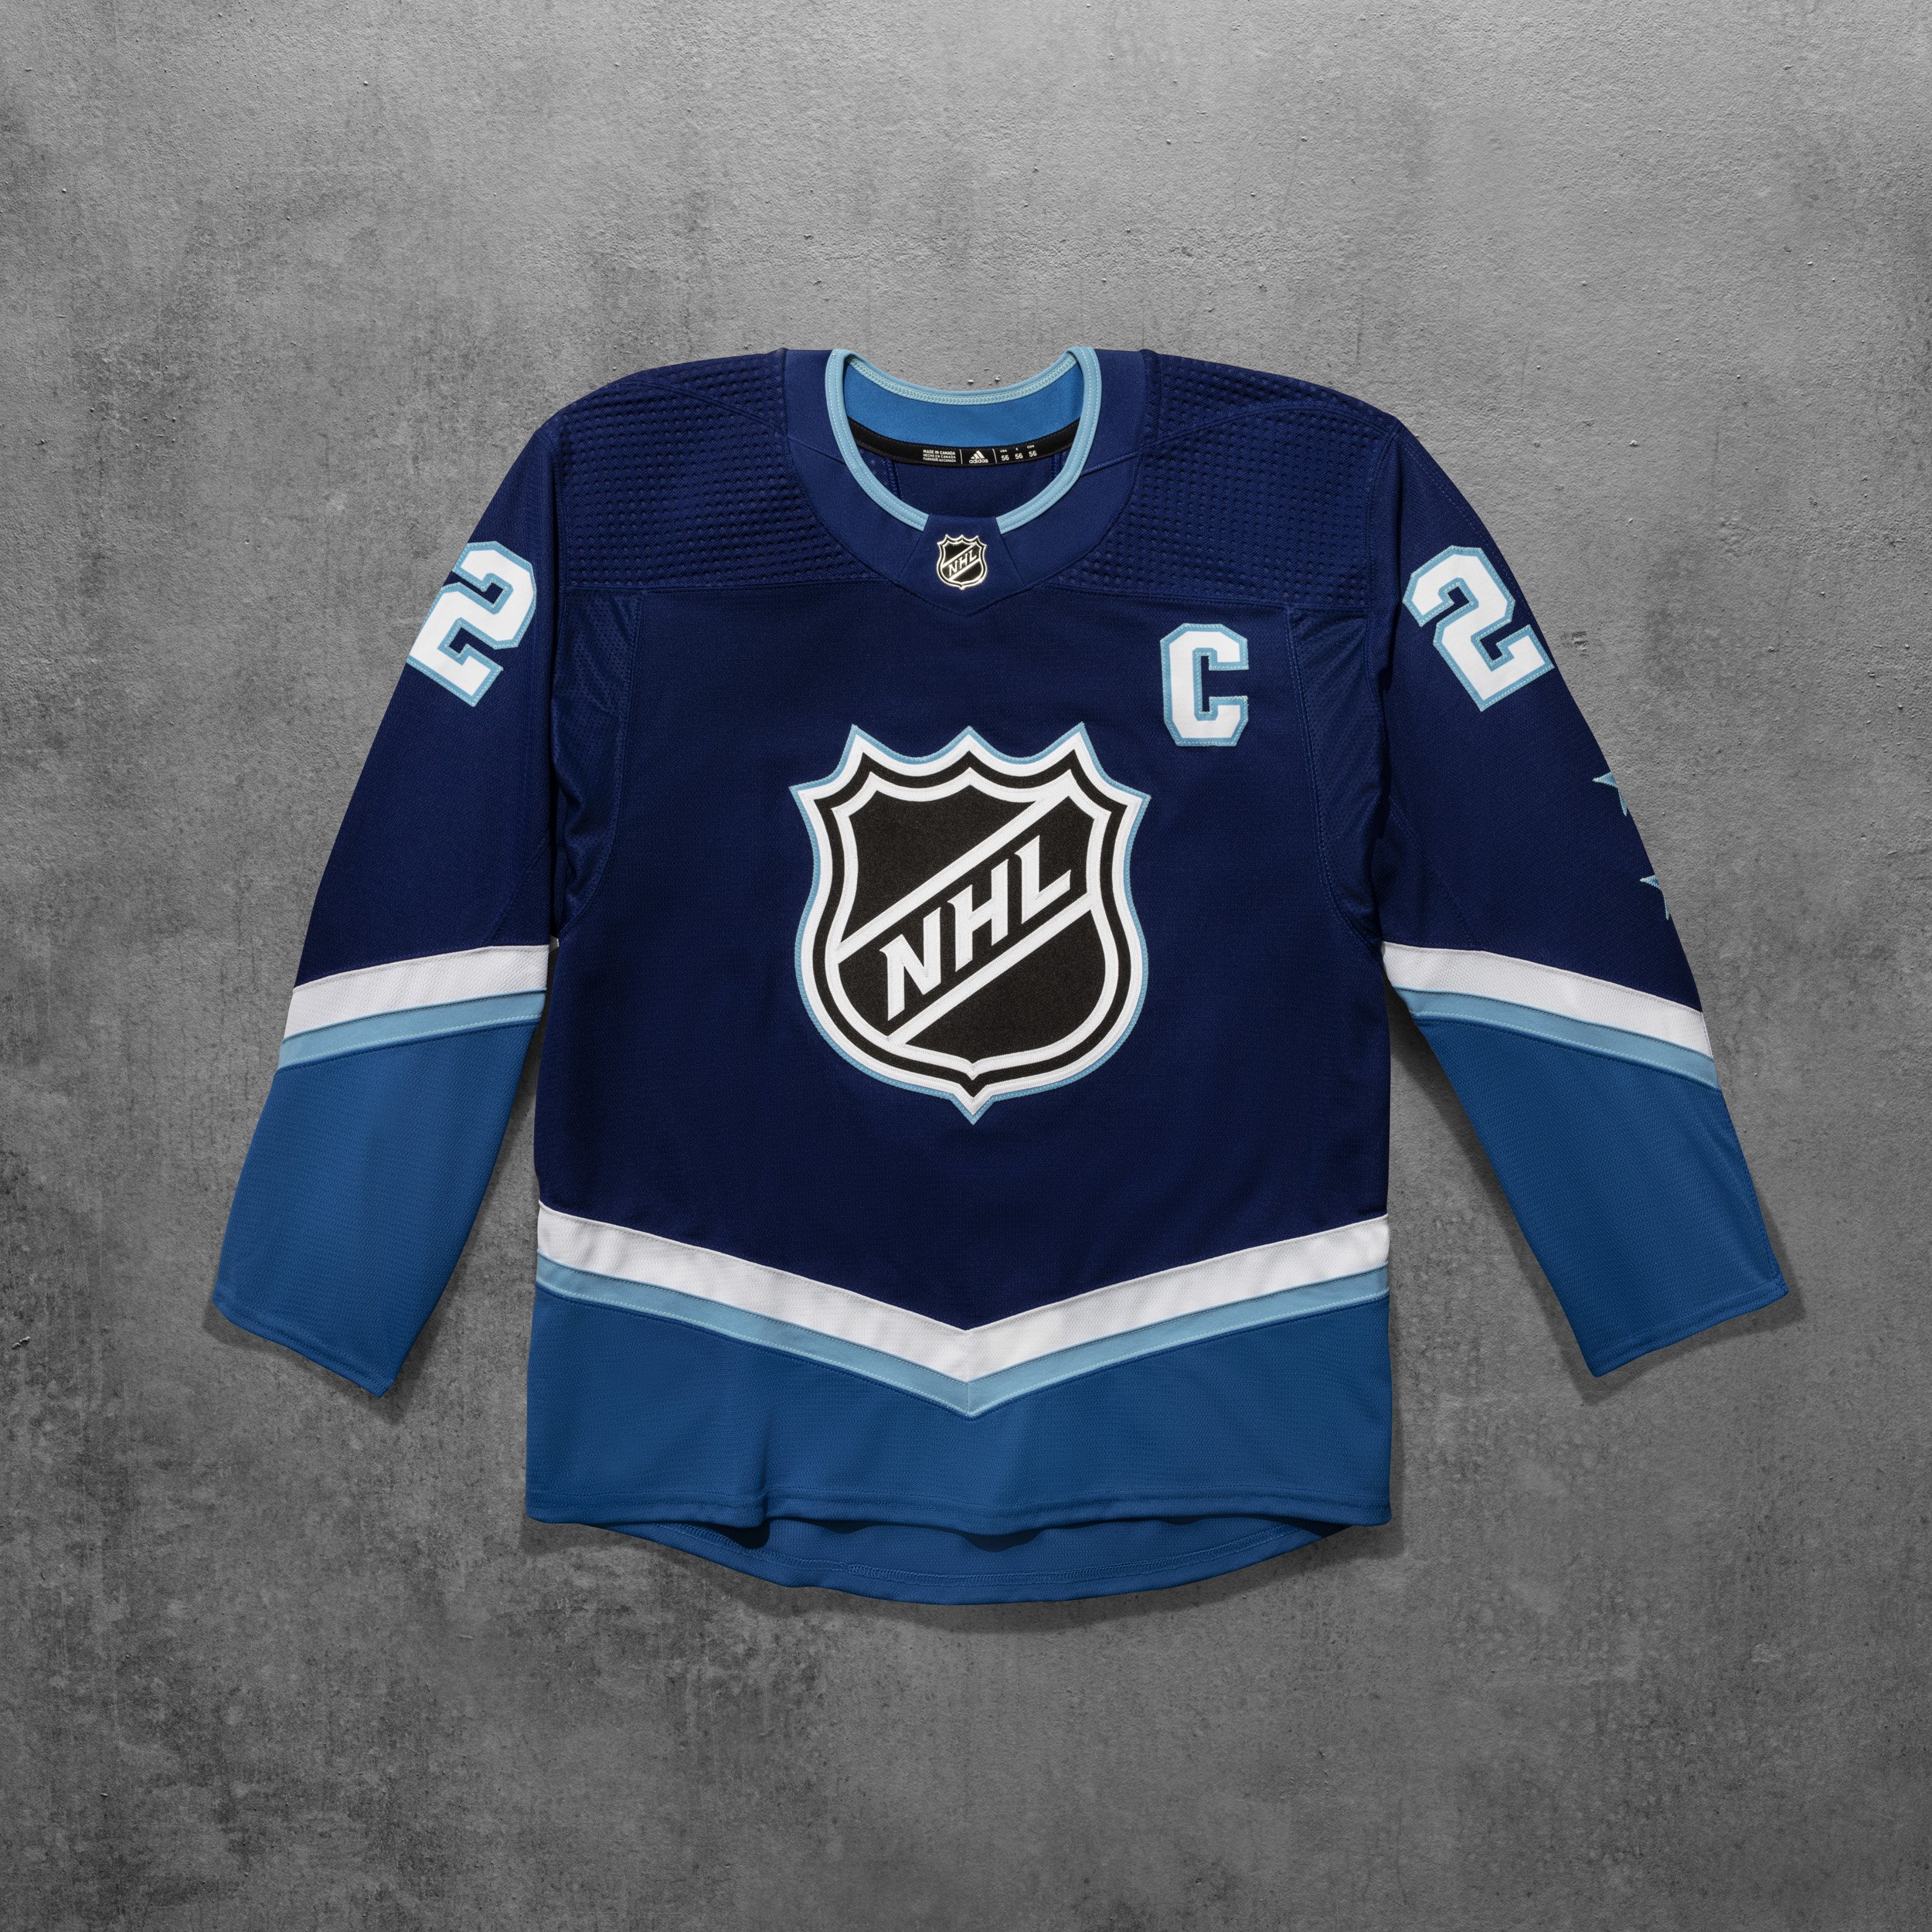 Redesigning the 2022 NHL All-Star Game jerseys - The Win Column